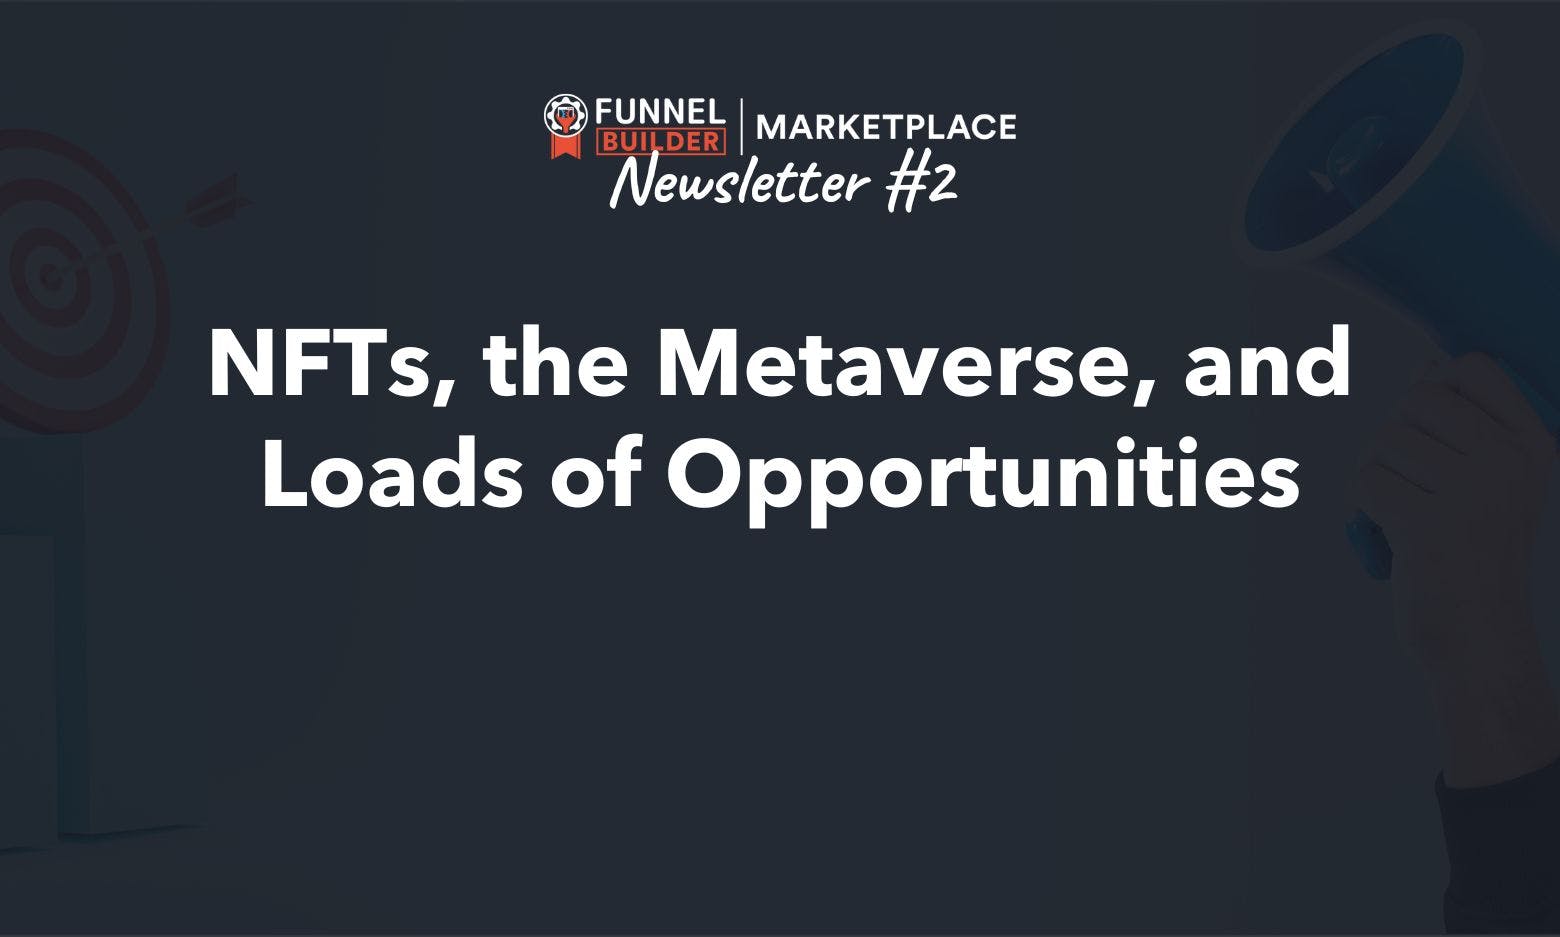 Newsletter #2: NFTs, the Metaverse, and Loads of Opportunities